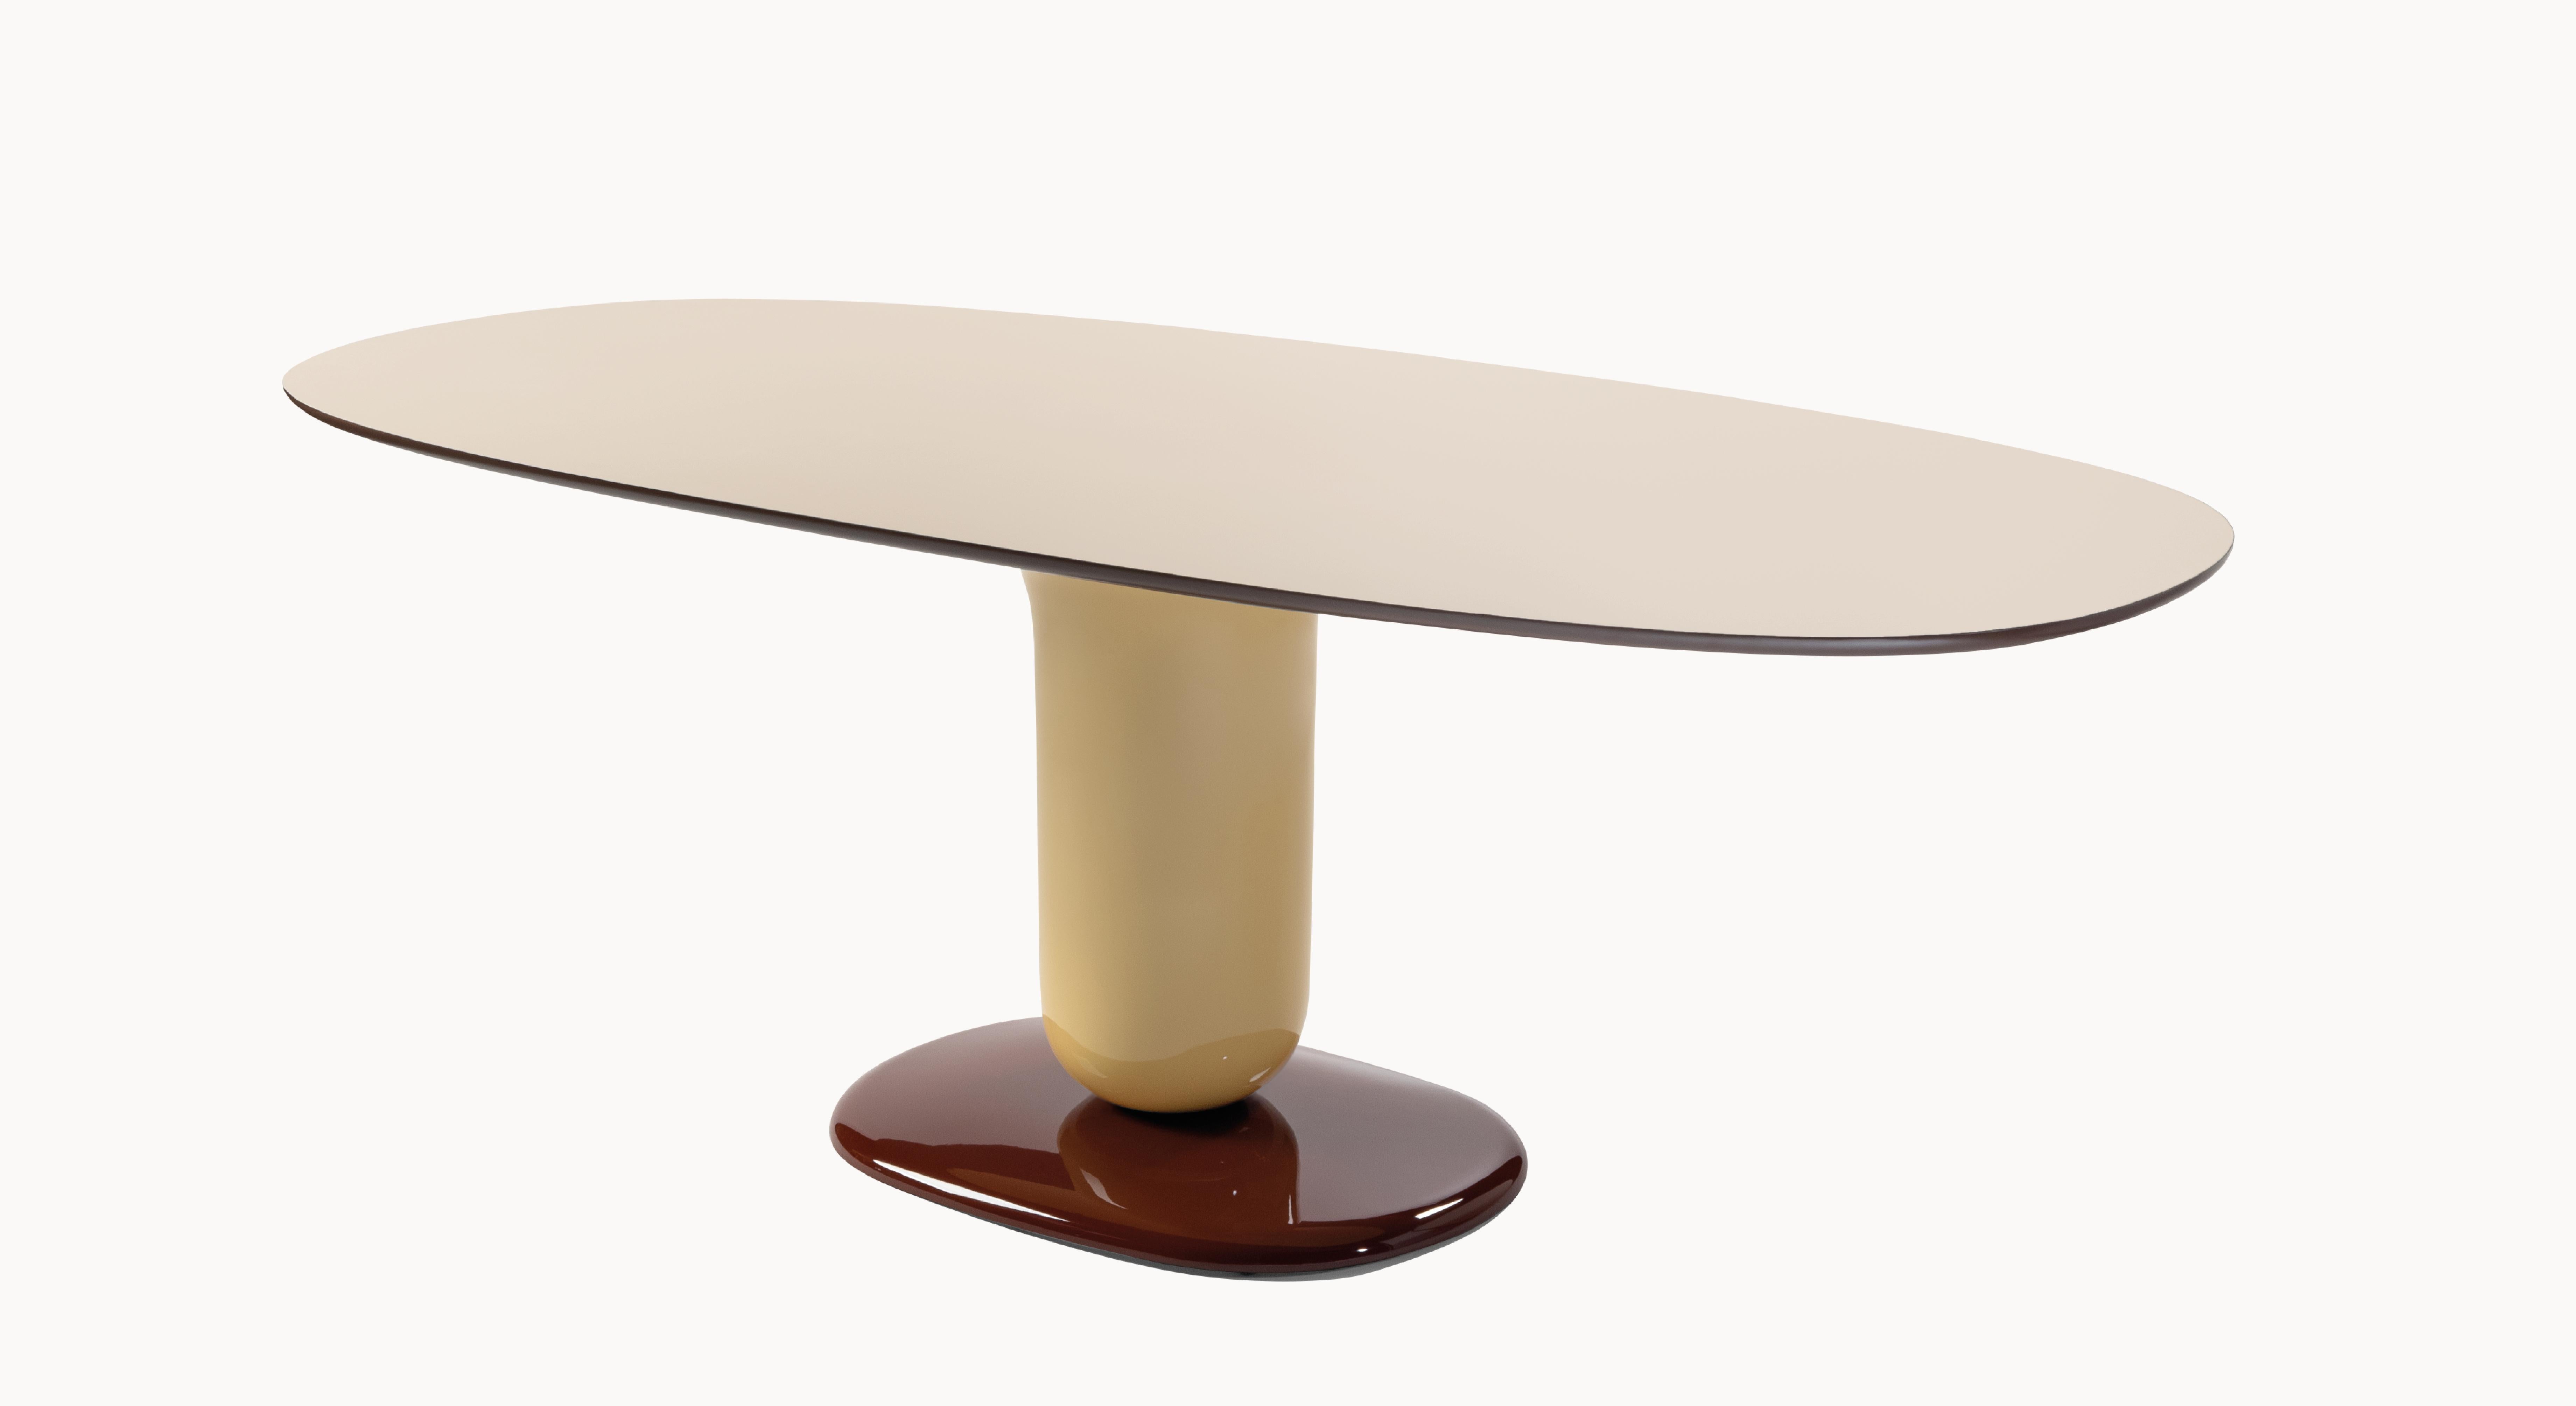 Steel Contemporary Dining Table 'Explorer' by Jaime Hayon, 190 cm, Ivory, Top Fenix  For Sale